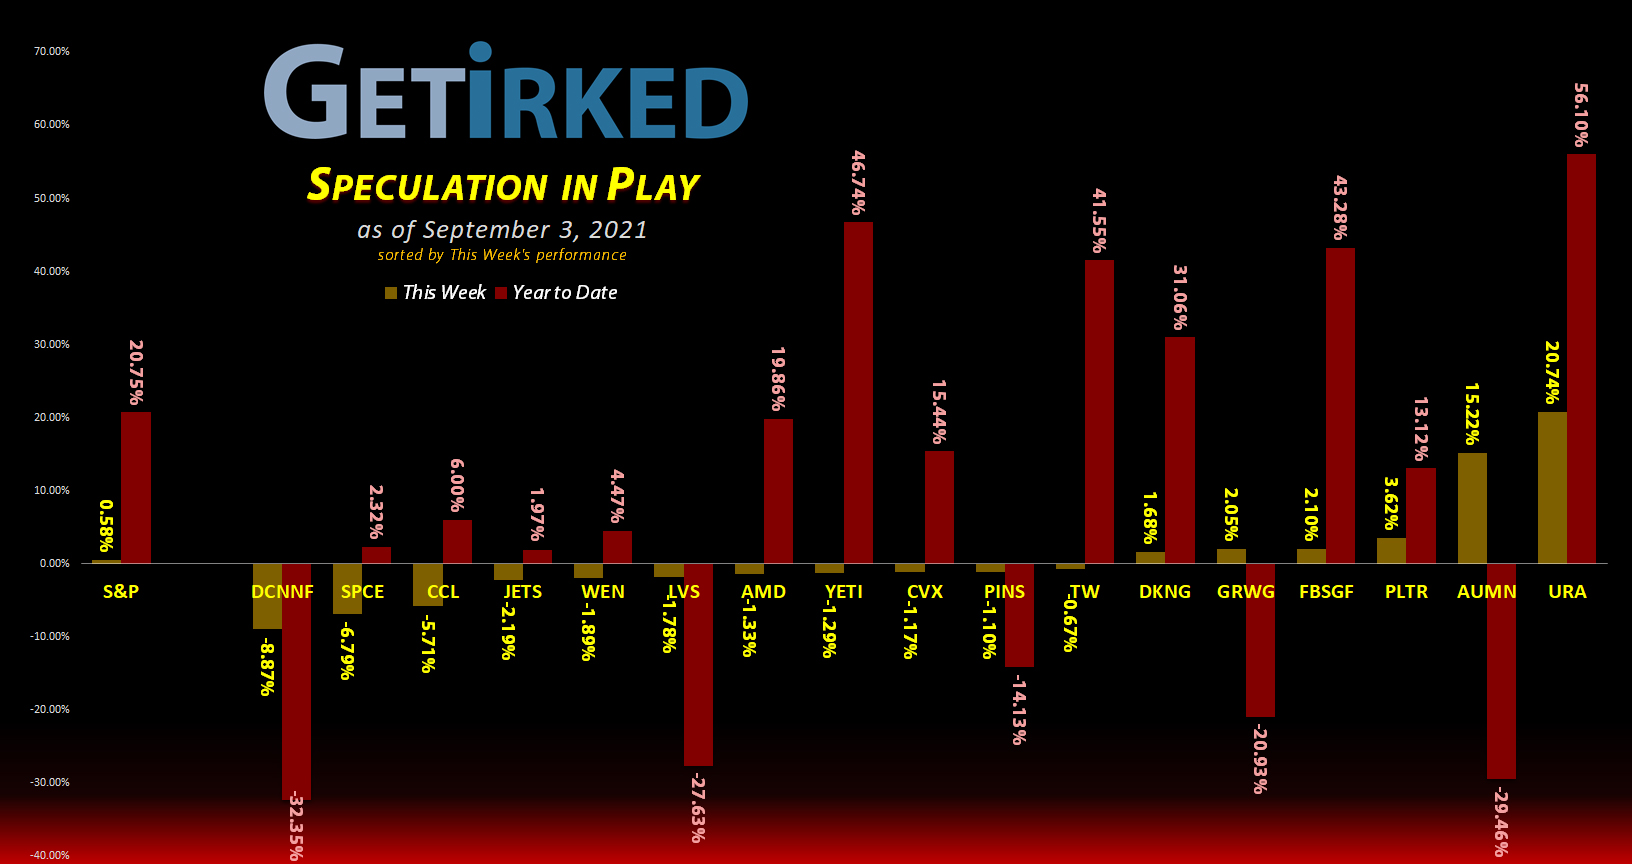 Get Irked's Speculation in Play - September 3, 2021